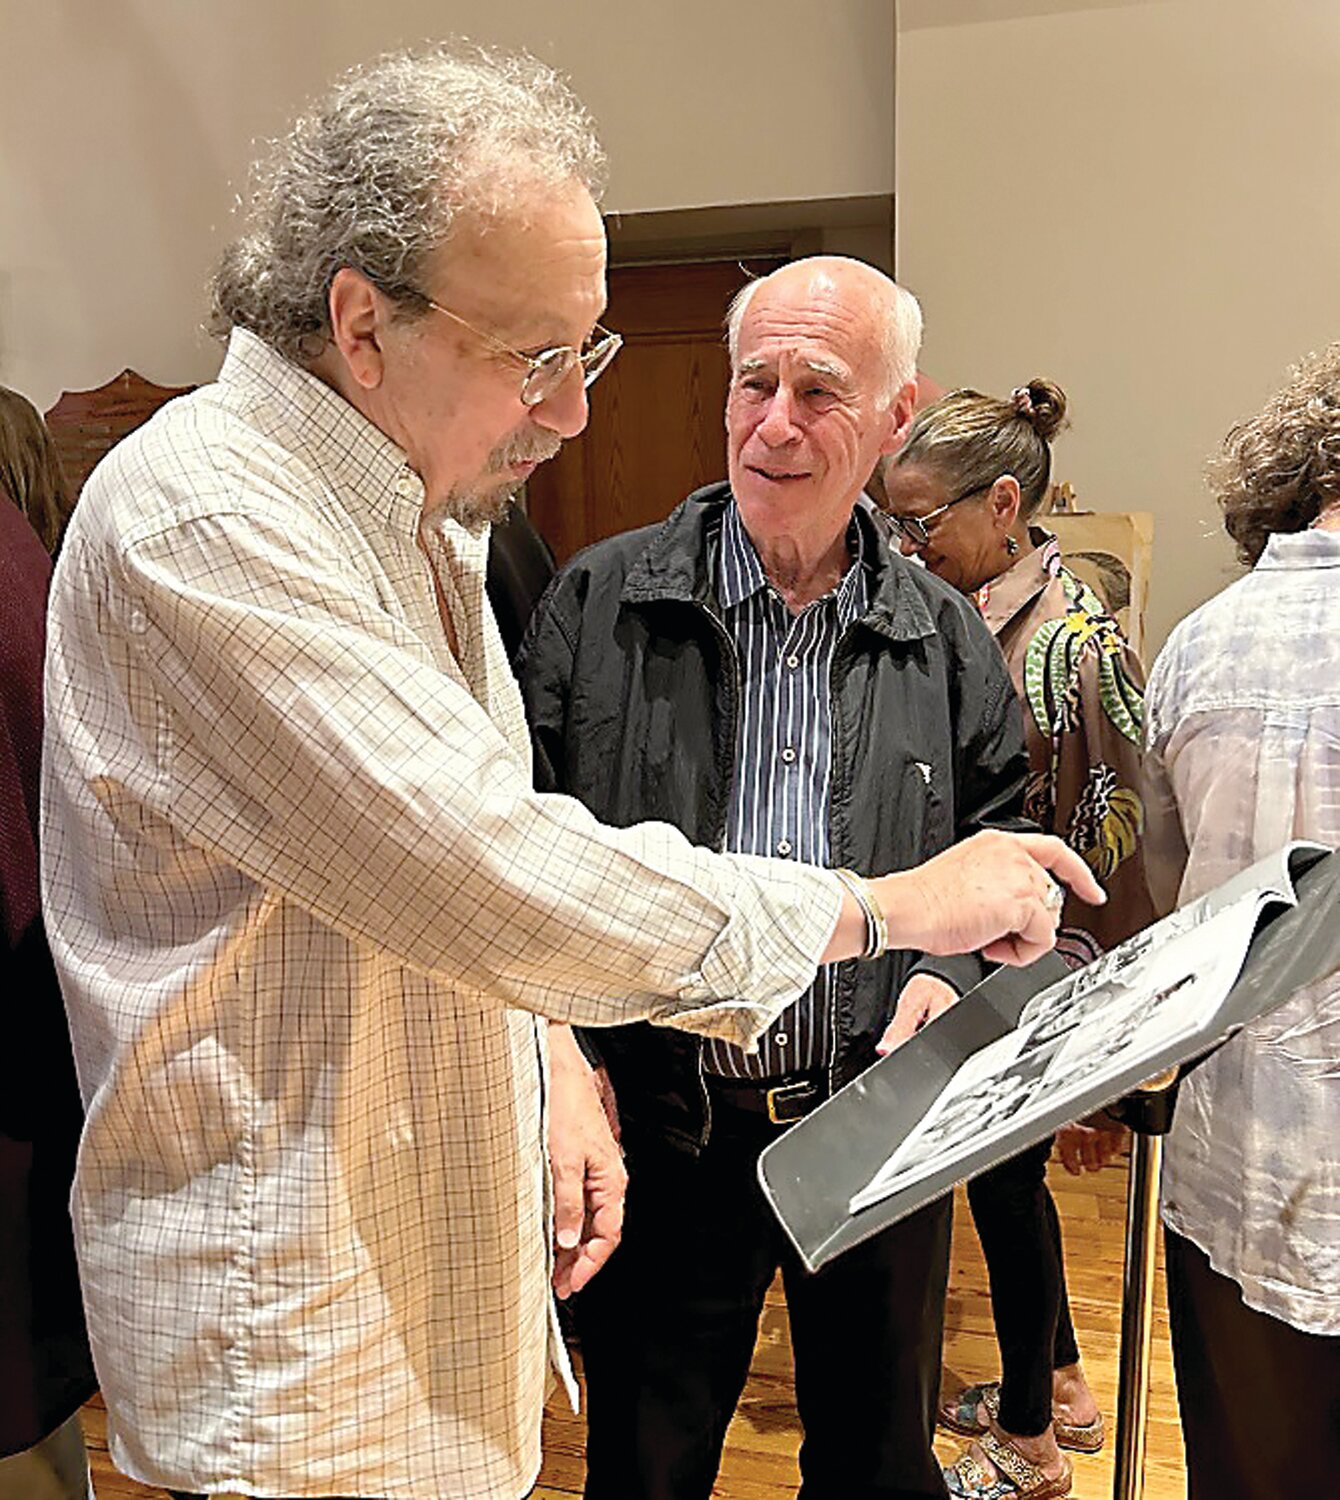 Rick Rosen (left) and Paul Murphy (right), owner of the former Sidetracks Art Gallery in New Hope, view the Jack Rosen Photography Book at a 100th birthday celebration in honor of the late New Hope photographer.